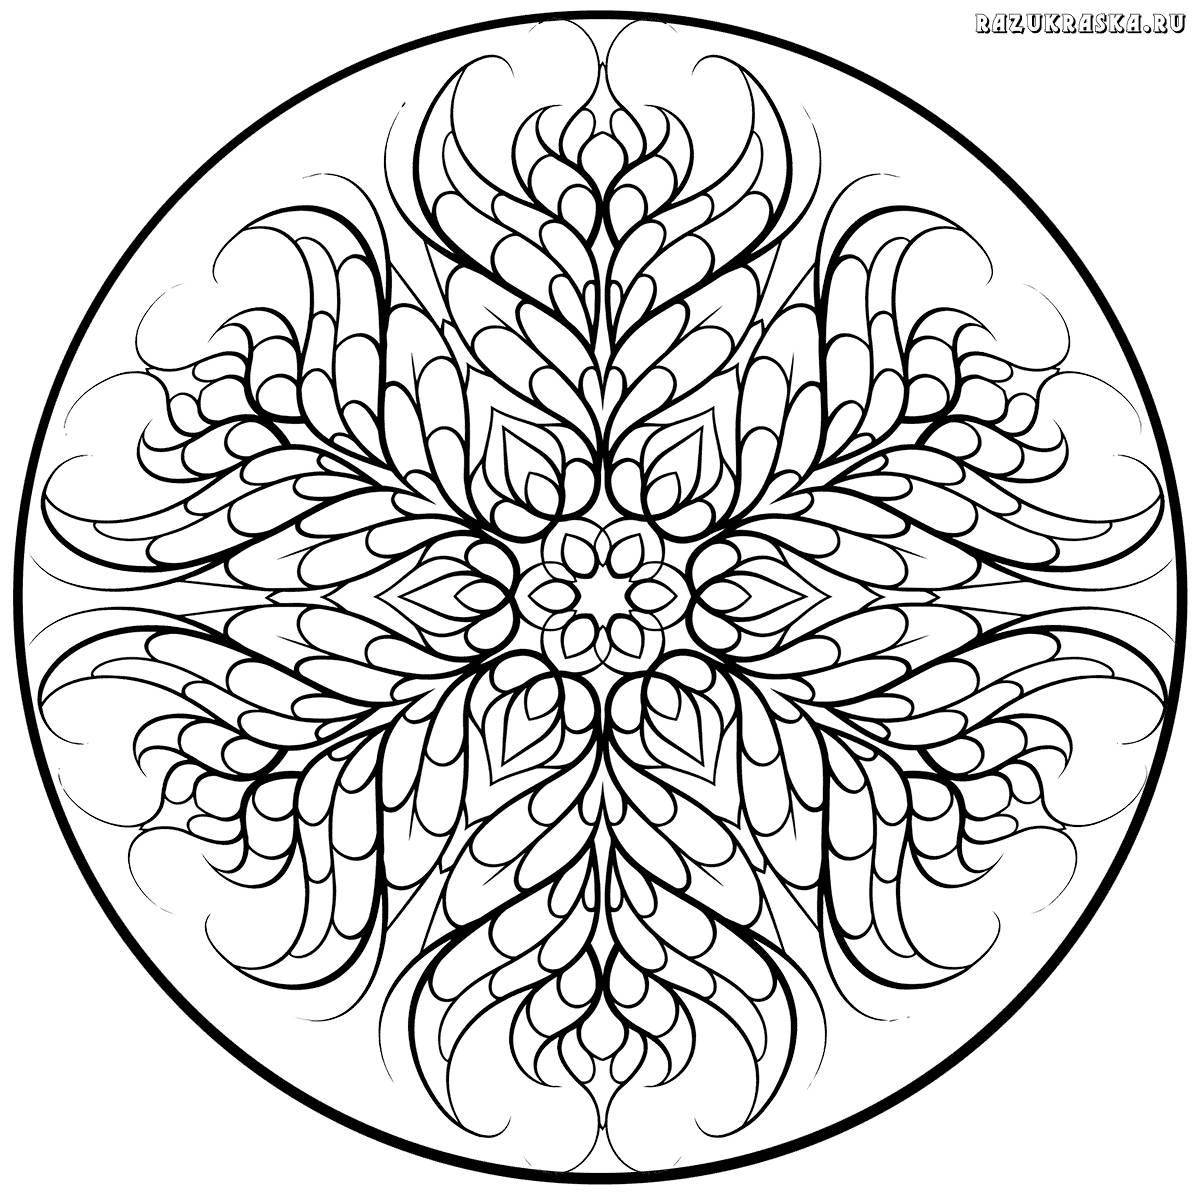 Coloring page whimsical circle of life